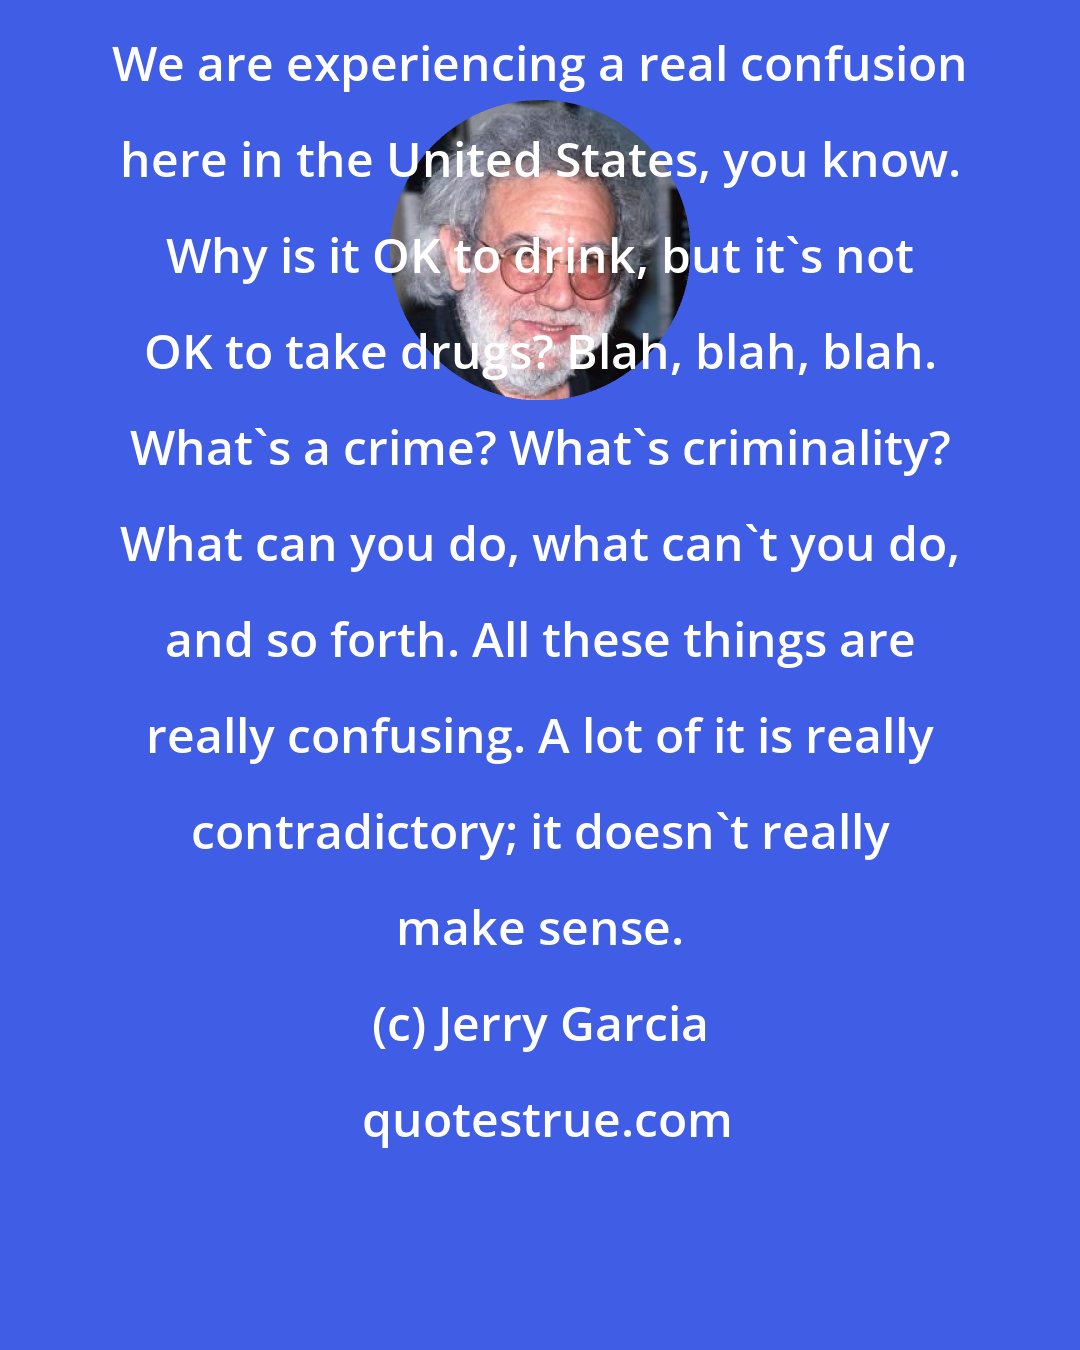 Jerry Garcia: We are experiencing a real confusion here in the United States, you know. Why is it OK to drink, but it's not OK to take drugs? Blah, blah, blah. What's a crime? What's criminality? What can you do, what can't you do, and so forth. All these things are really confusing. A lot of it is really contradictory; it doesn't really make sense.